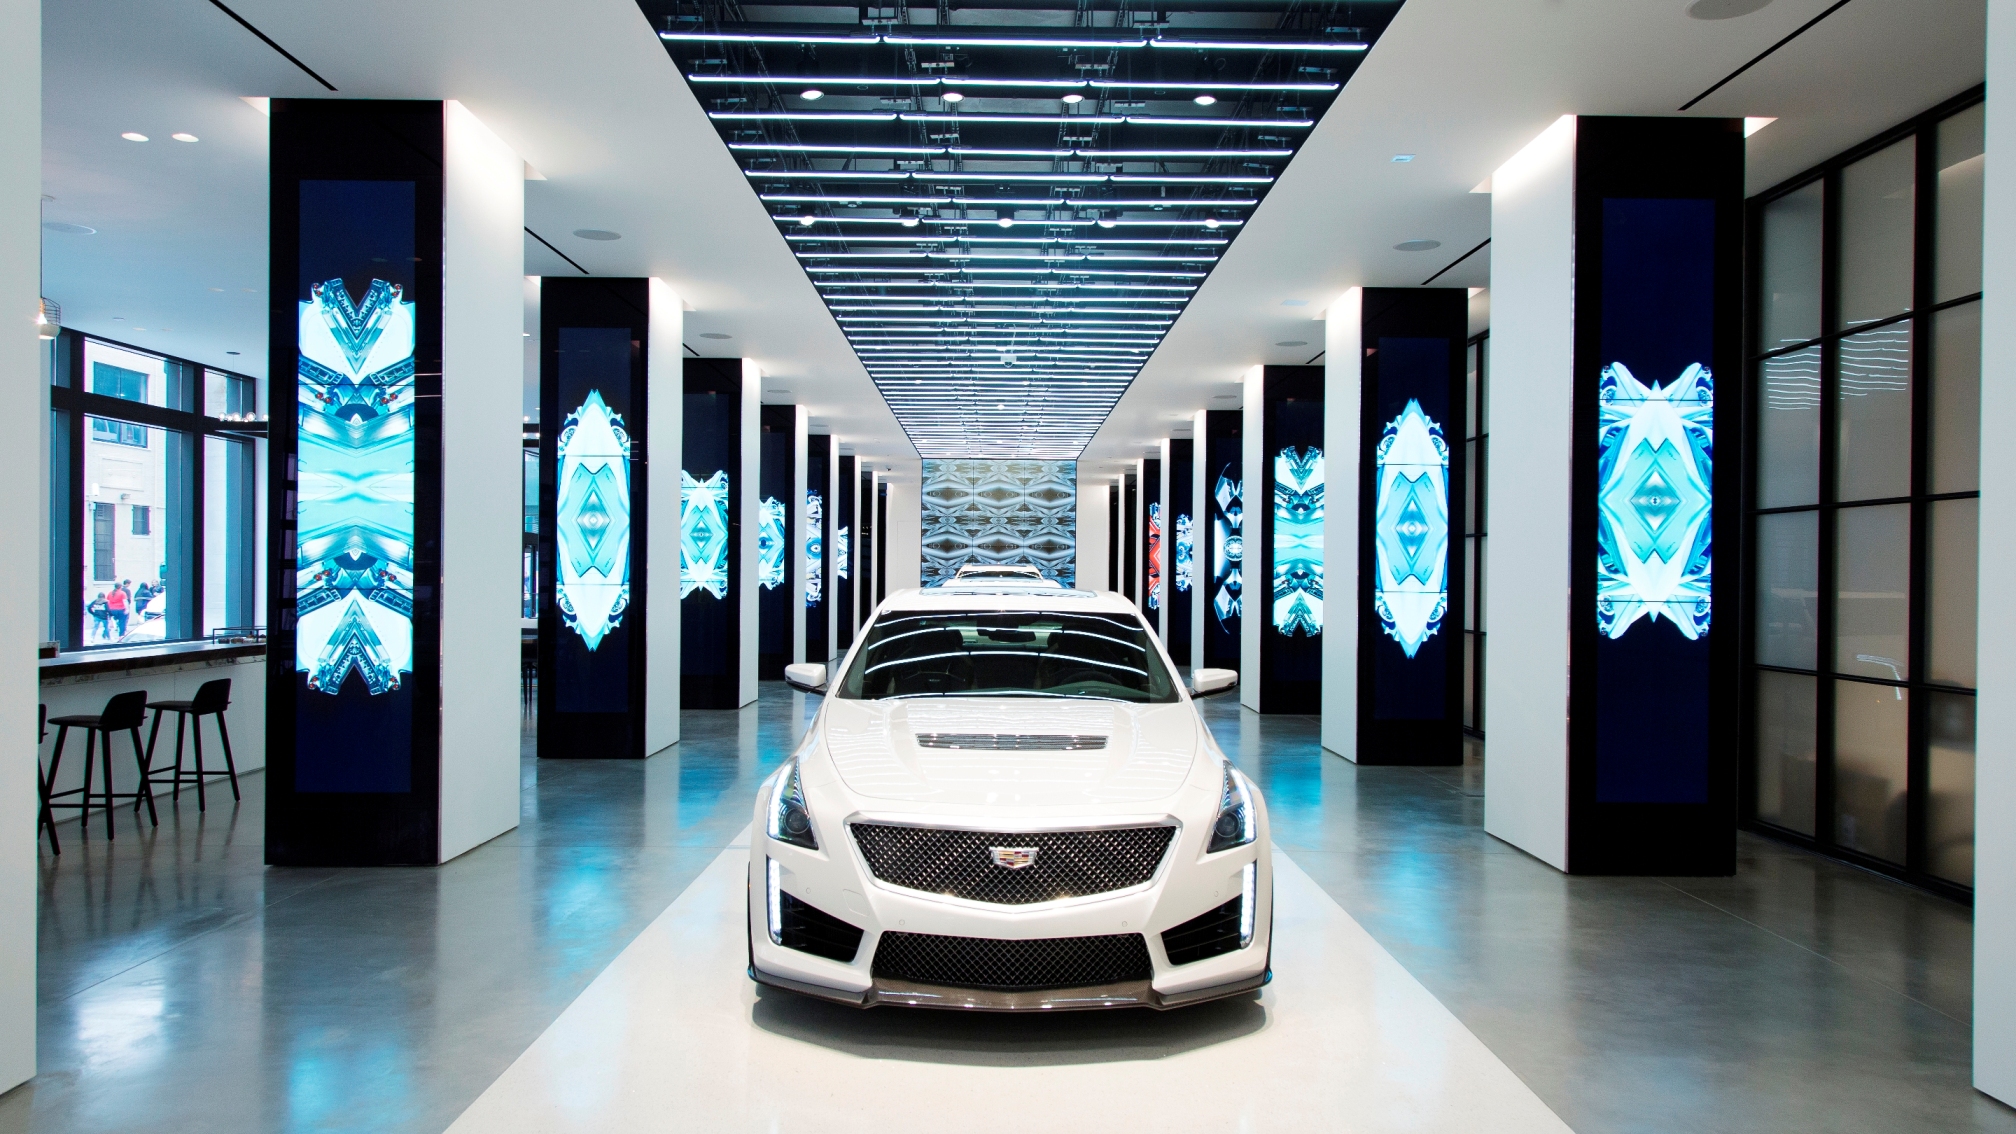 CTS-V, CT6, and XT5 vehicles will be stationed on the runway inside. Copyright Gensler